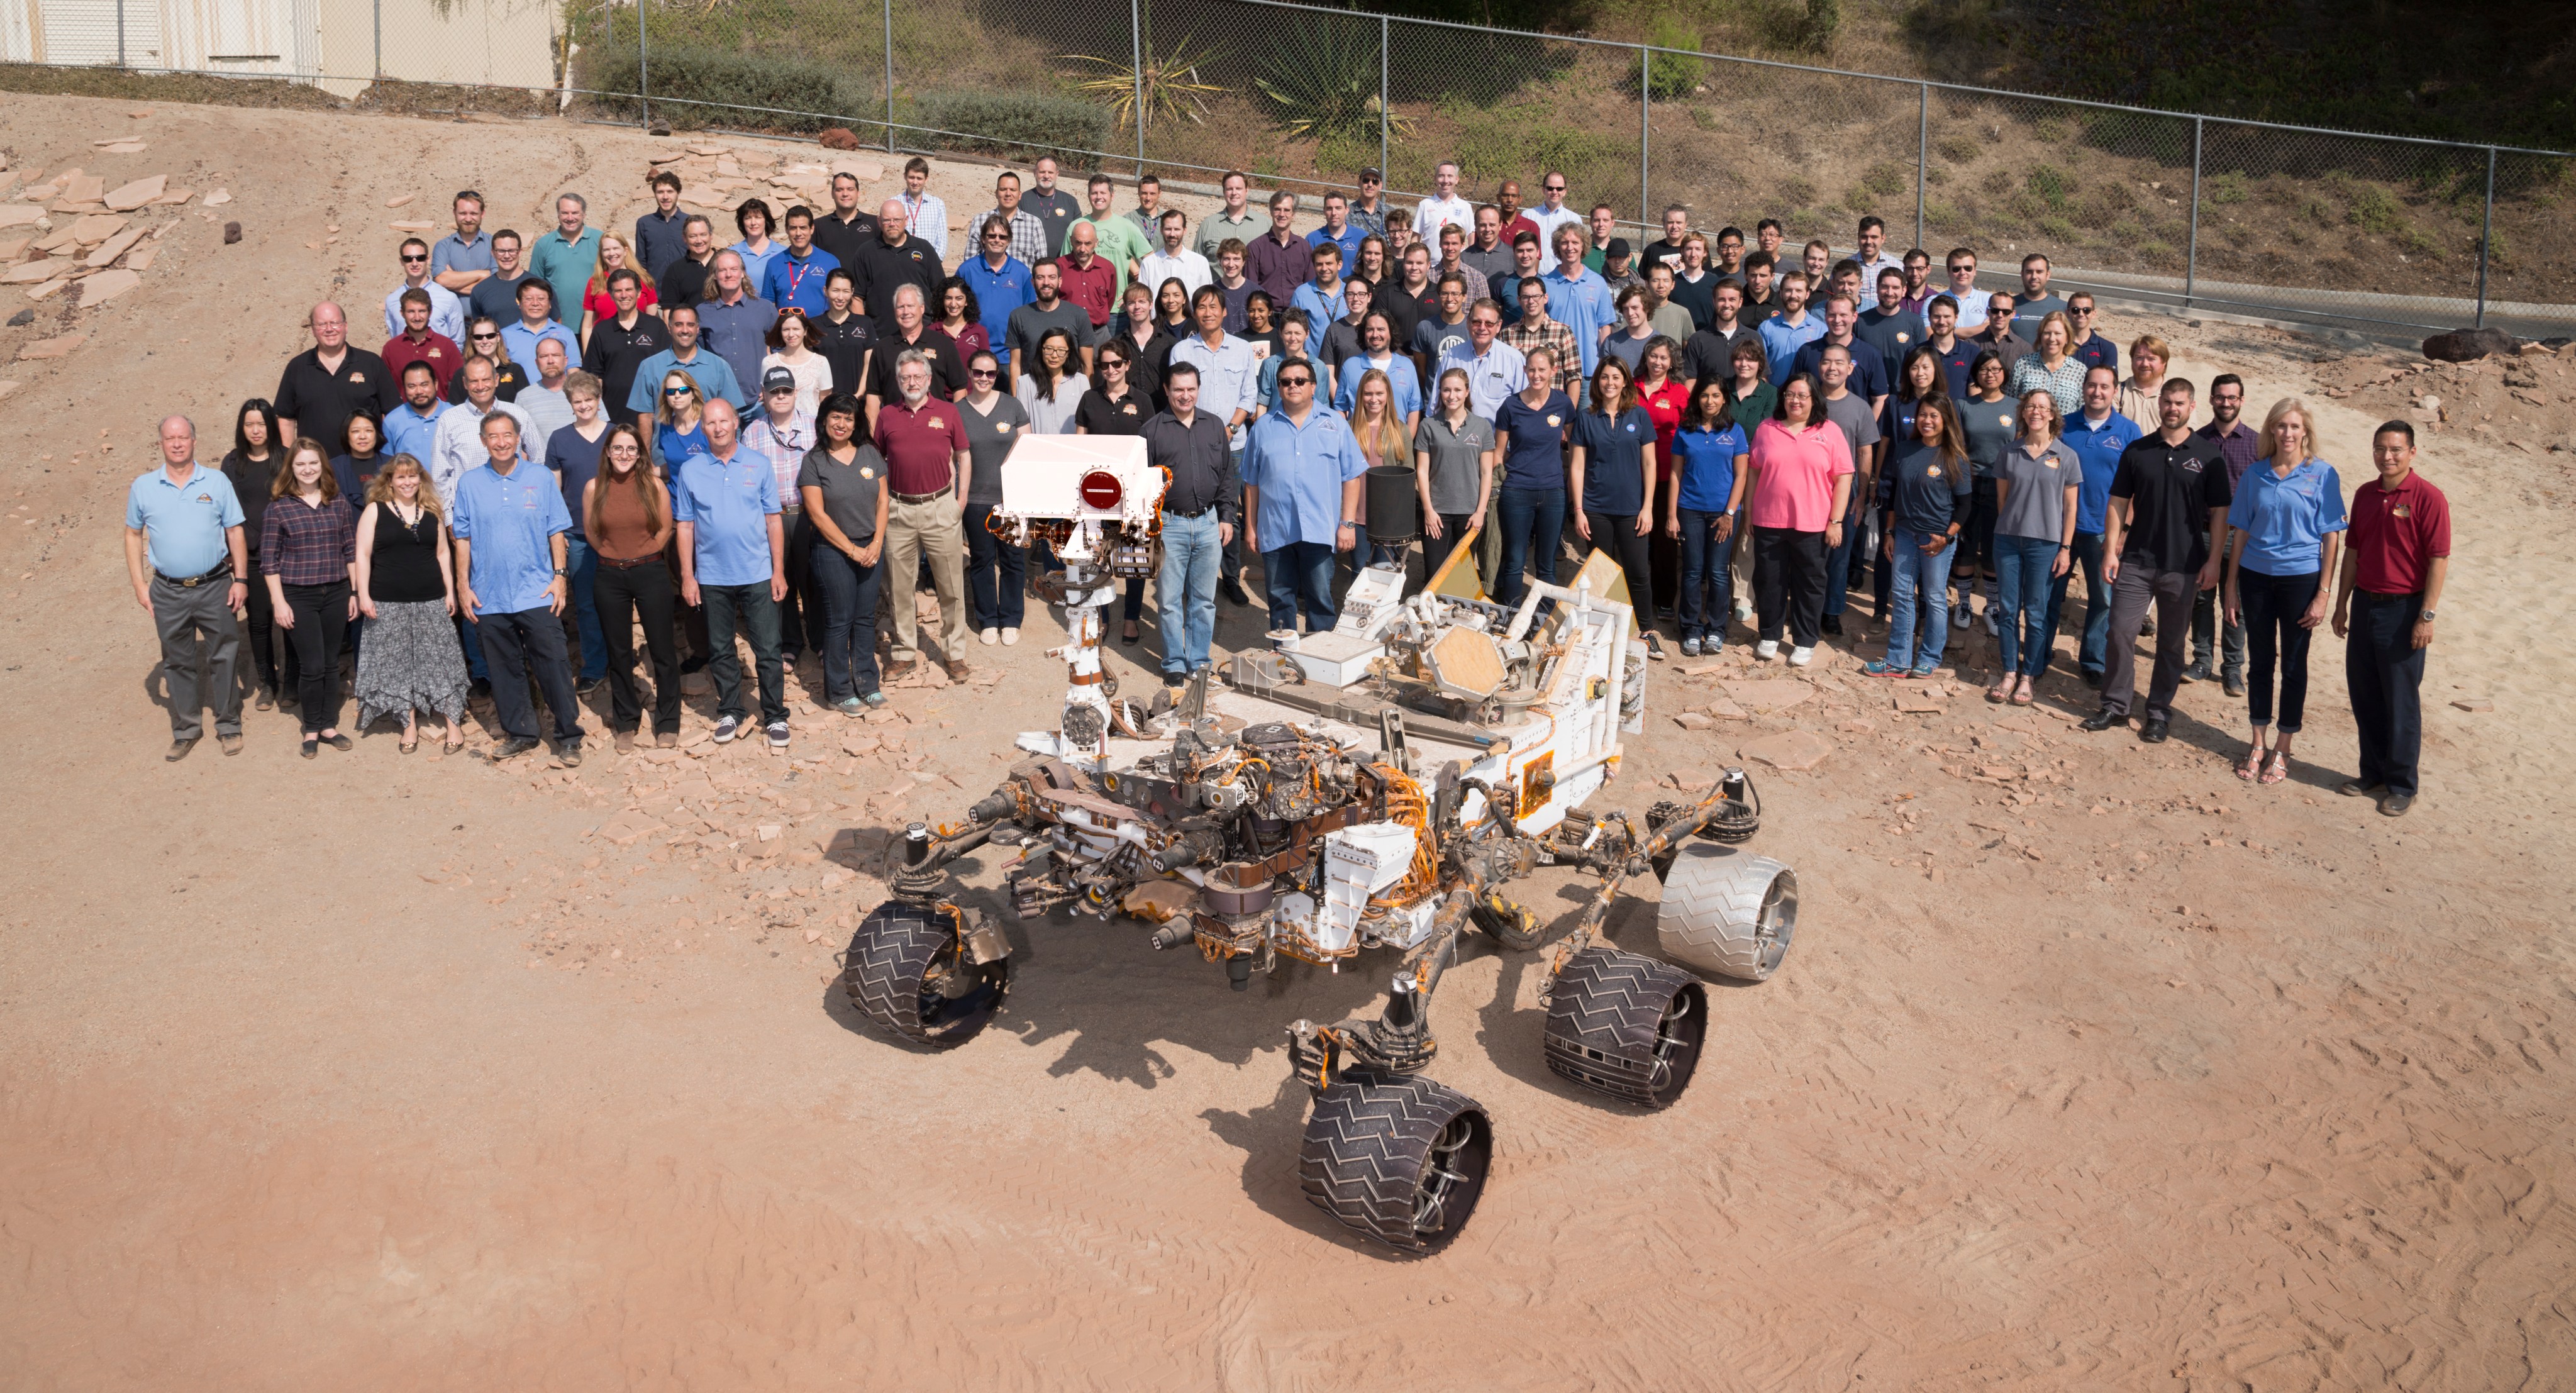 Many members of NASA's Mars Science Laboratory Project, which operates the Curiosity rover on Mars, gathered for this 2016 team photo with a test rover in the "Mars Yard" at NASA's Jet Propulsion Laboratory, Pasadena, California.